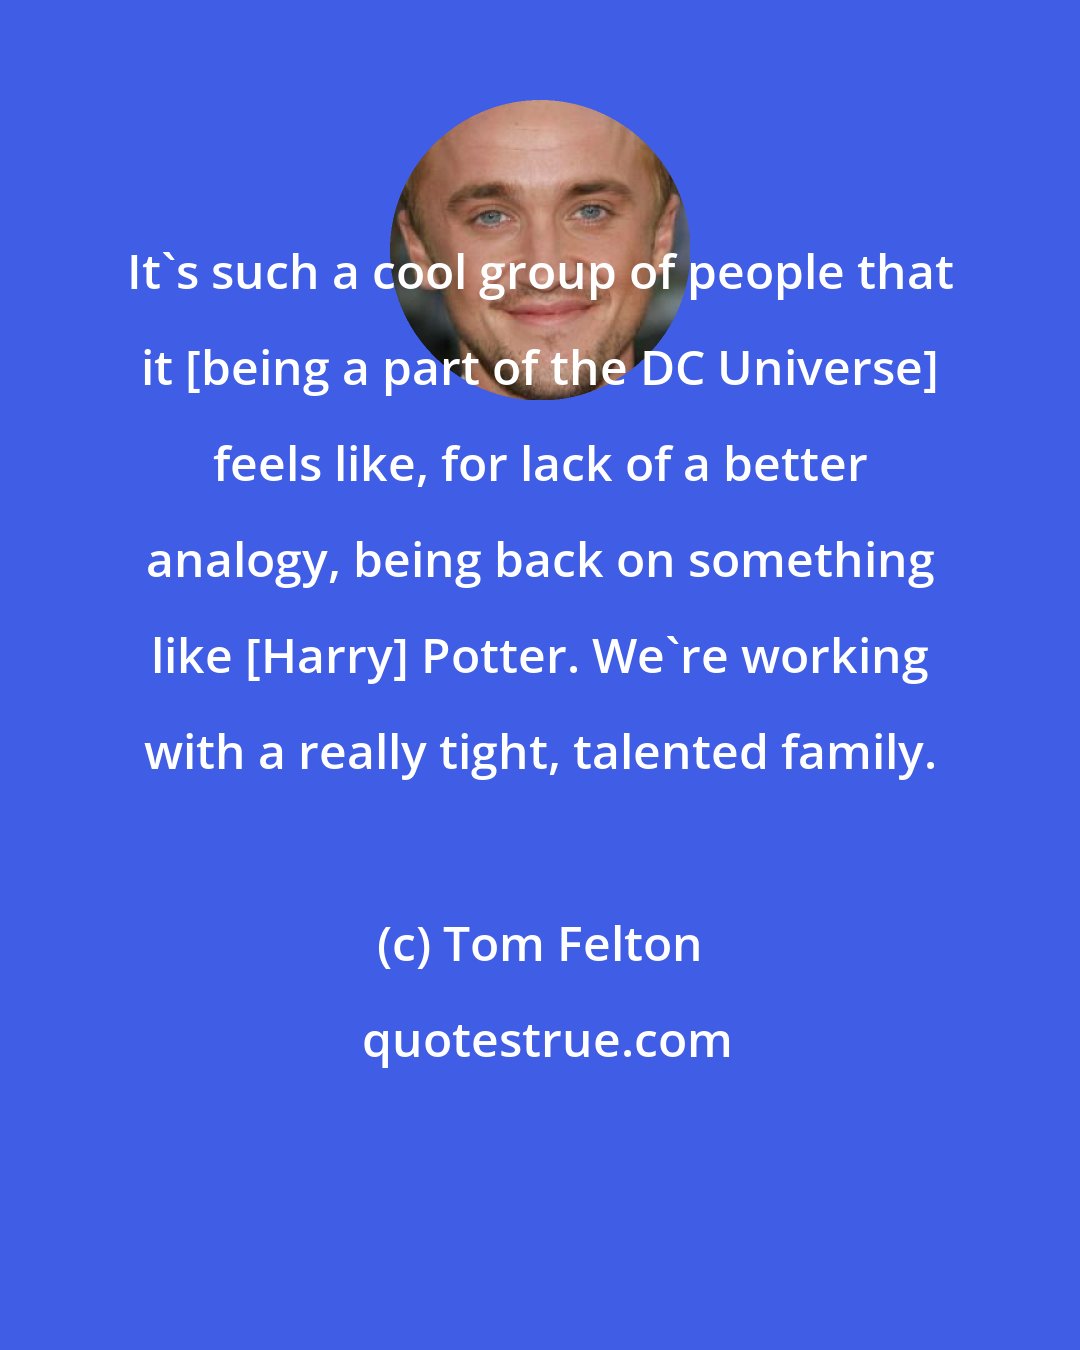 Tom Felton: It's such a cool group of people that it [being a part of the DC Universe] feels like, for lack of a better analogy, being back on something like [Harry] Potter. We're working with a really tight, talented family.